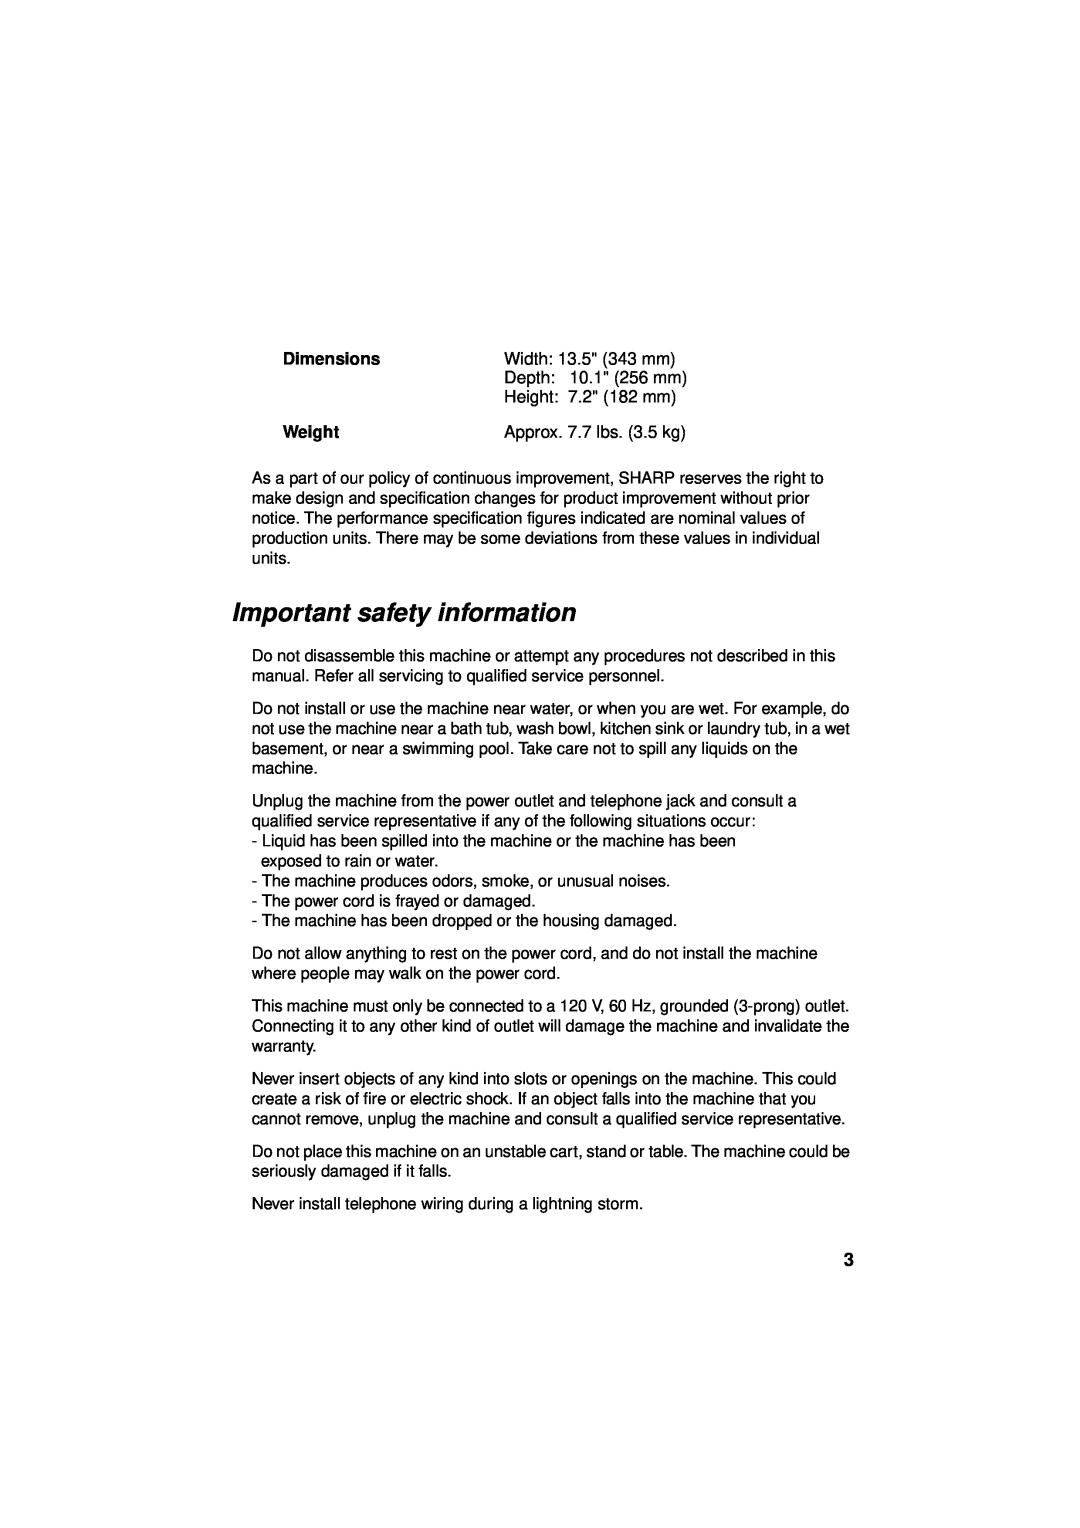 Sharp UX-340LM manual Important safety information, Dimensions, Weight 